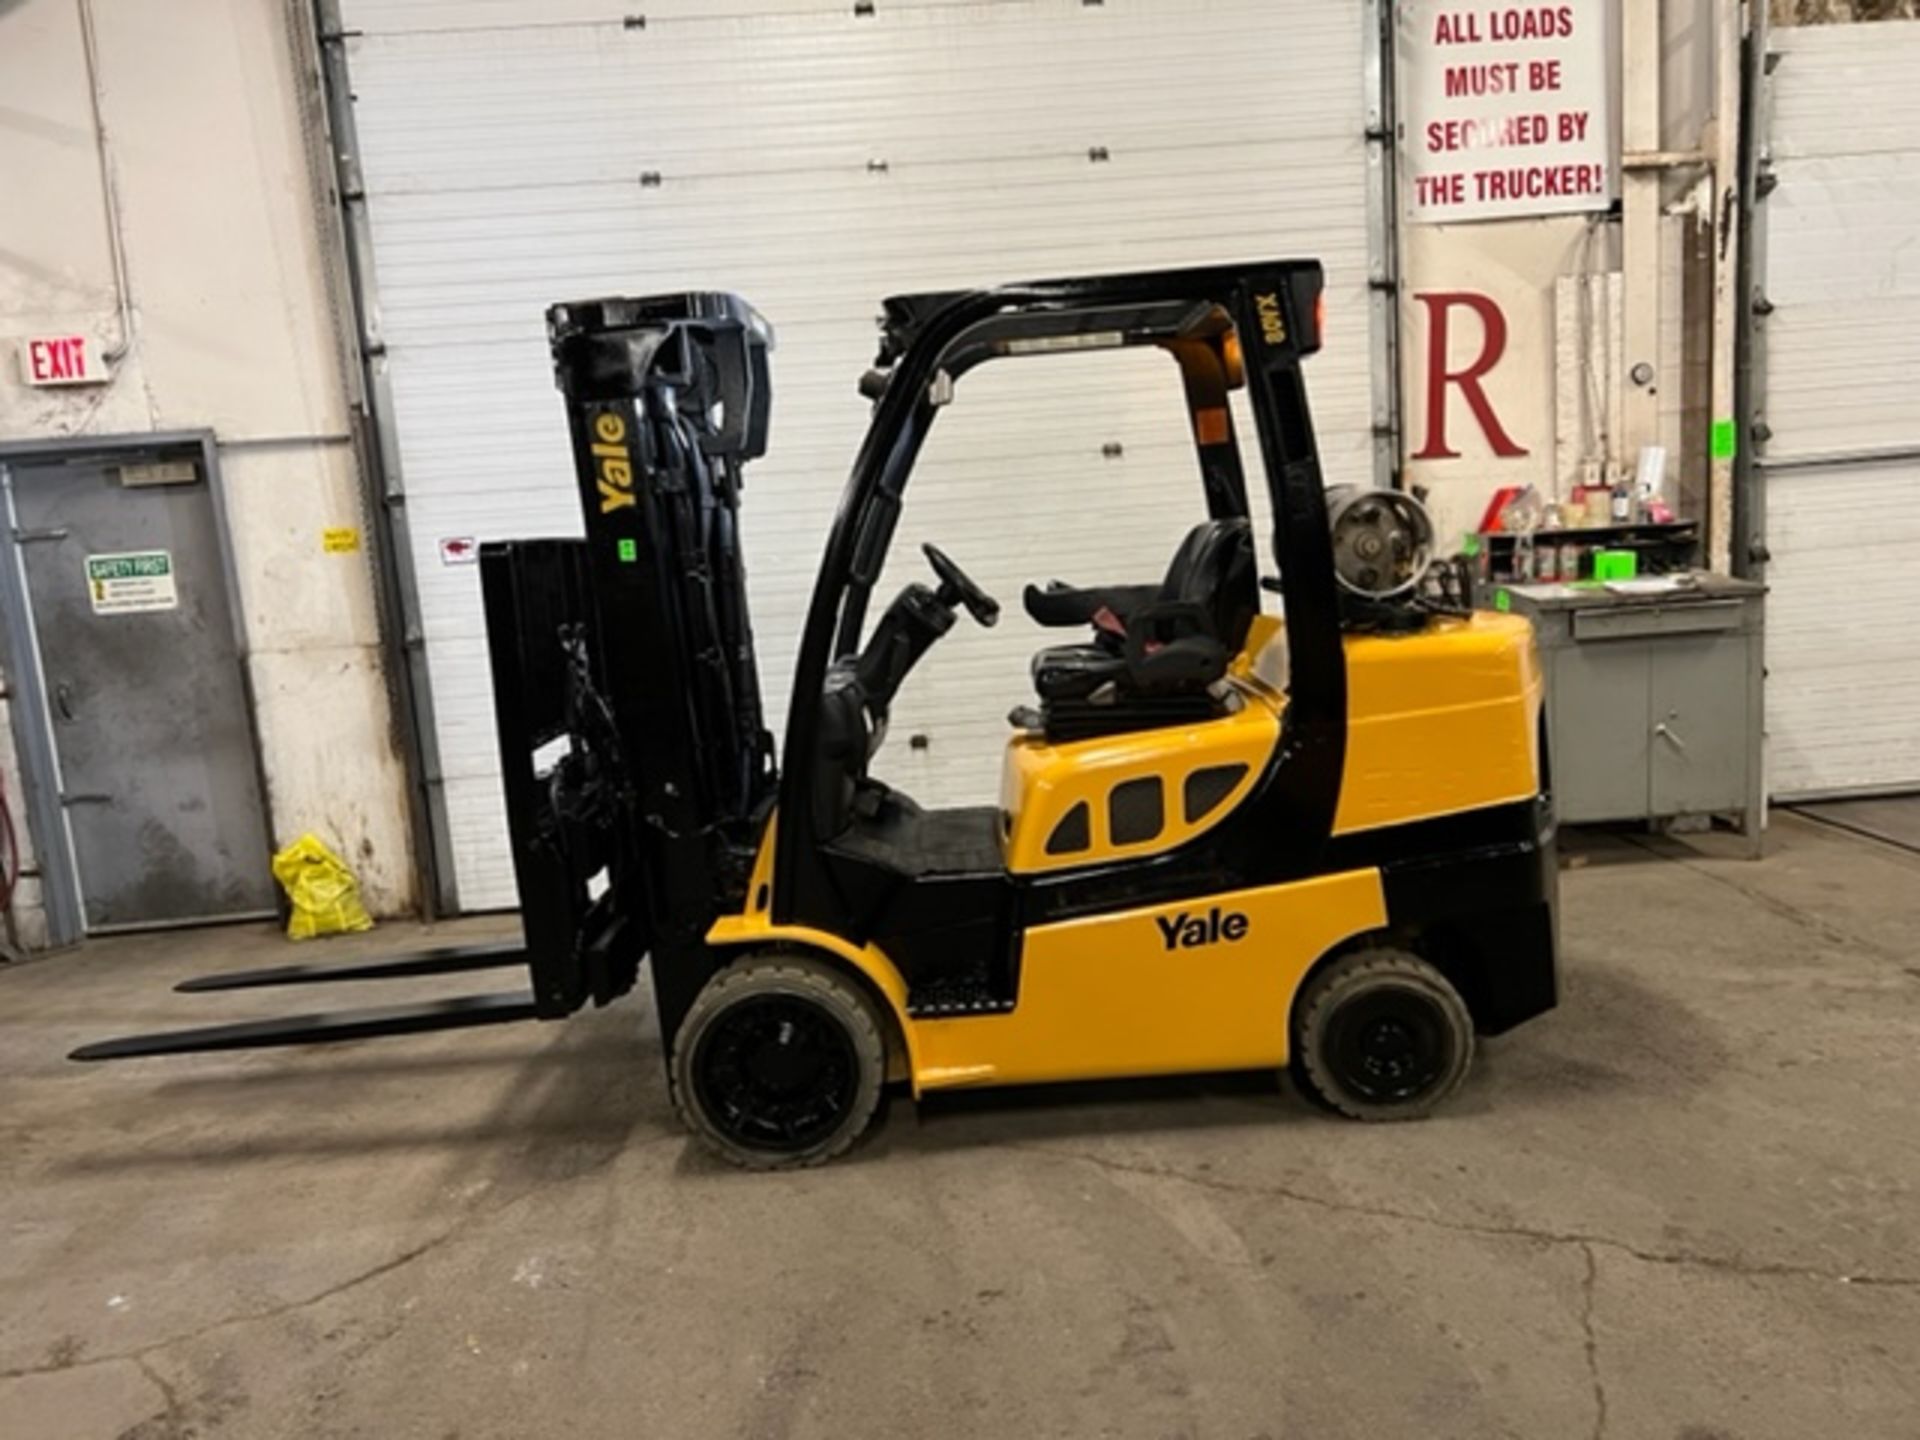 FREE CUSTOMS - NICE 2018 Yale model 80 - 8,000lbs Capacity Forklift LPG (propane) with 54" forks